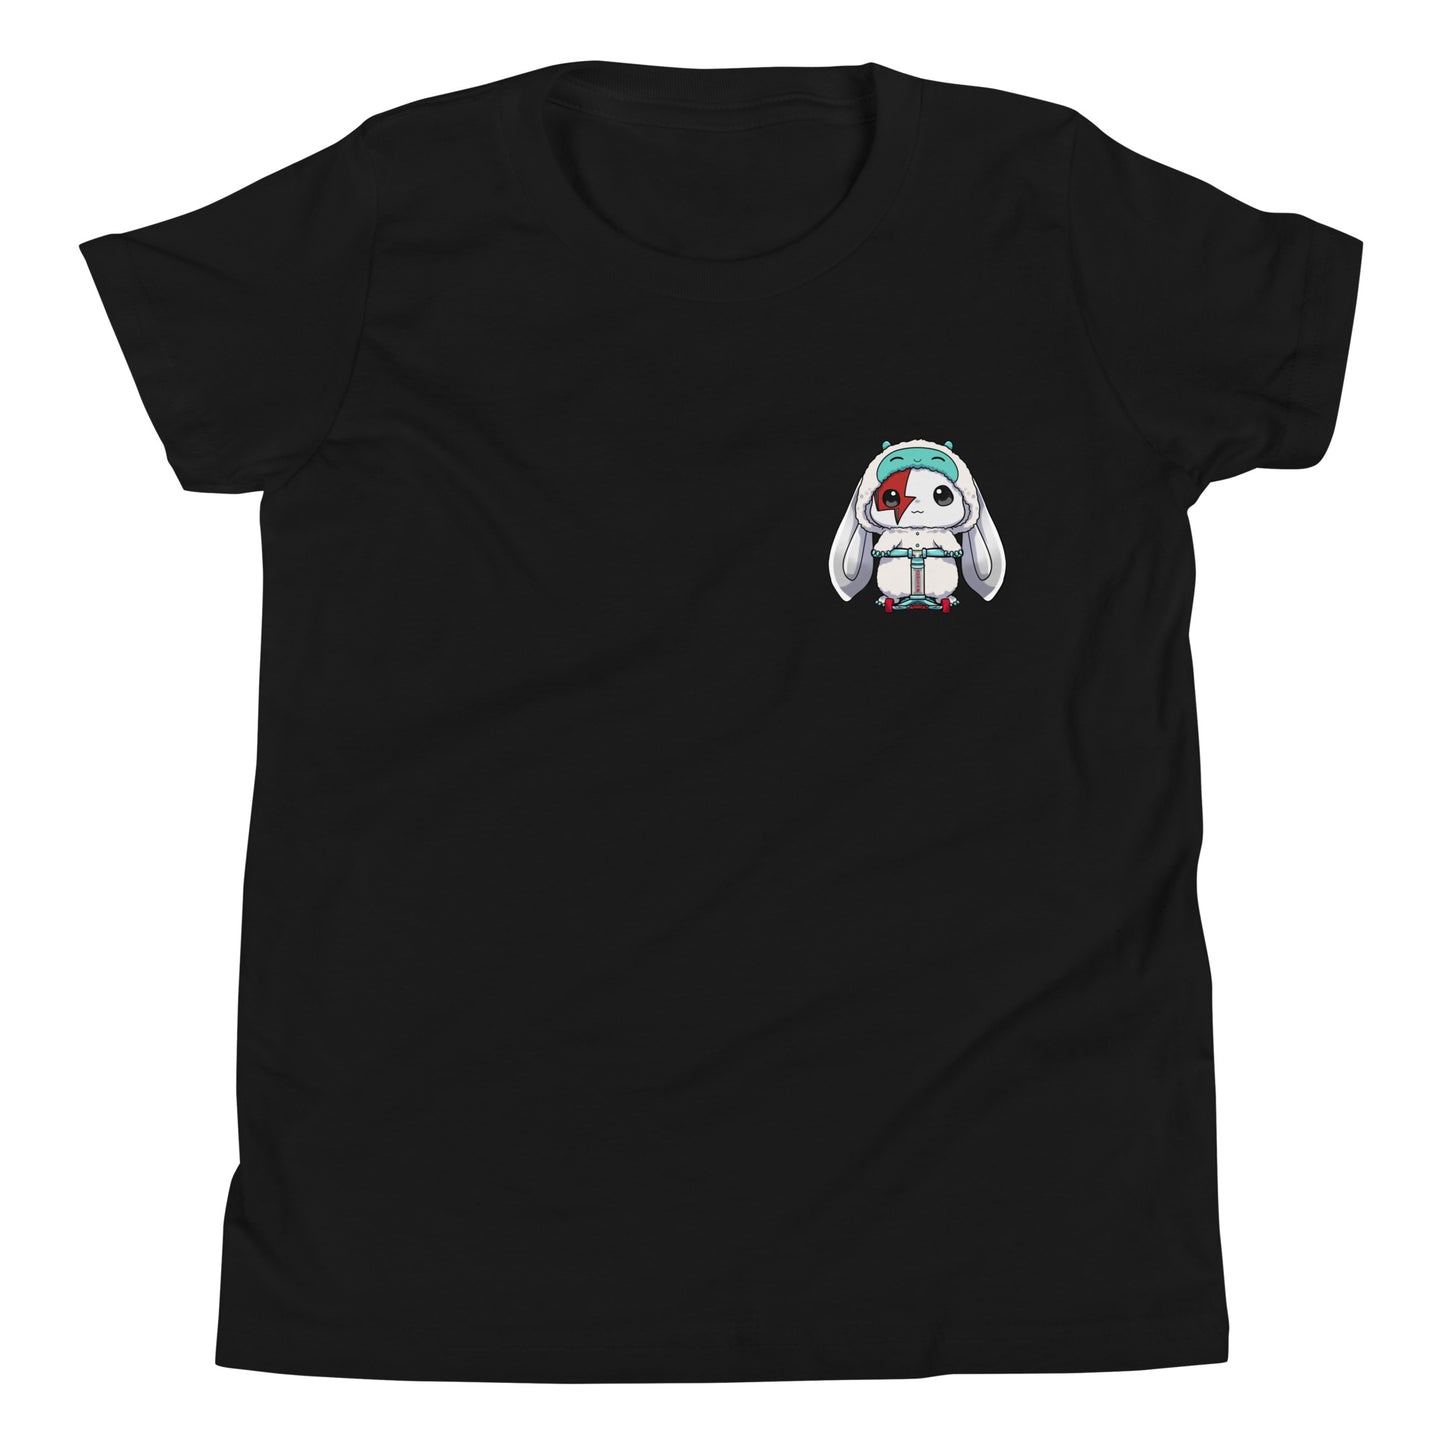 SVOLTA *$18 Deal* Bunny T-shirt in Black, S-XL - Kids/Youth, Multiple Styles